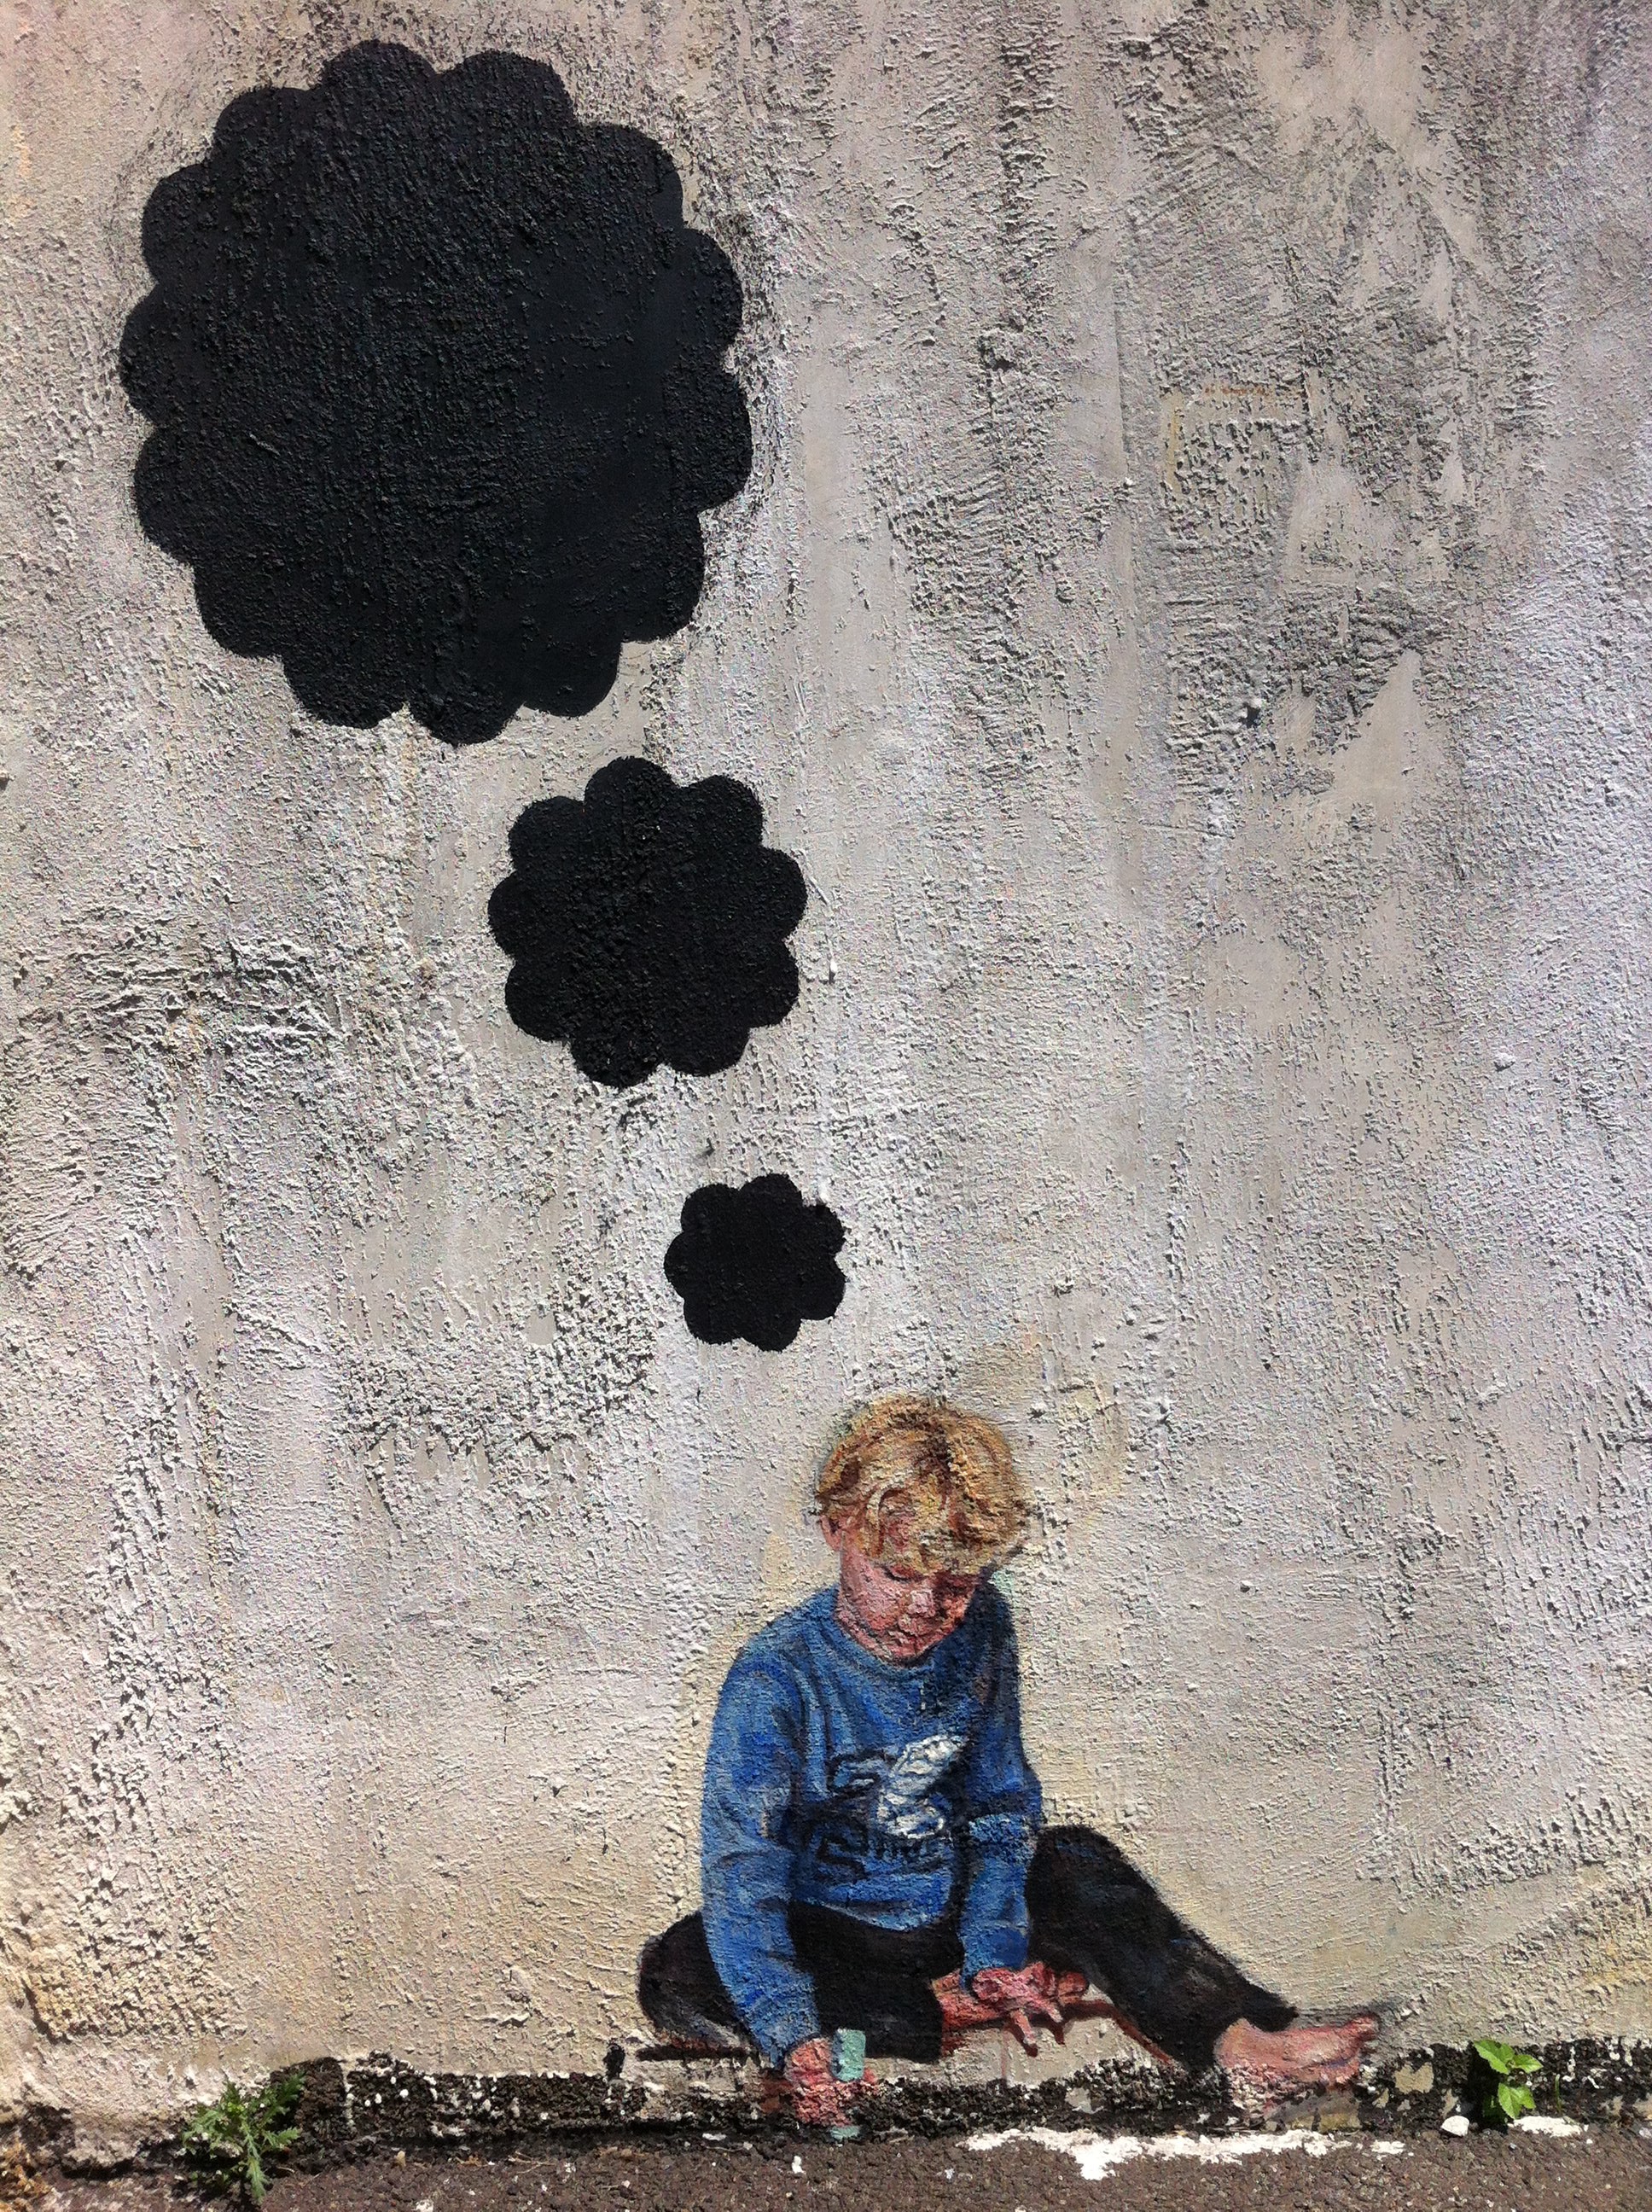 Mia Massimino's mural is located outside the Takoma Park Community Center.  Local Residents are encouraged to use chalk to fill in the boy's thought bubbles.